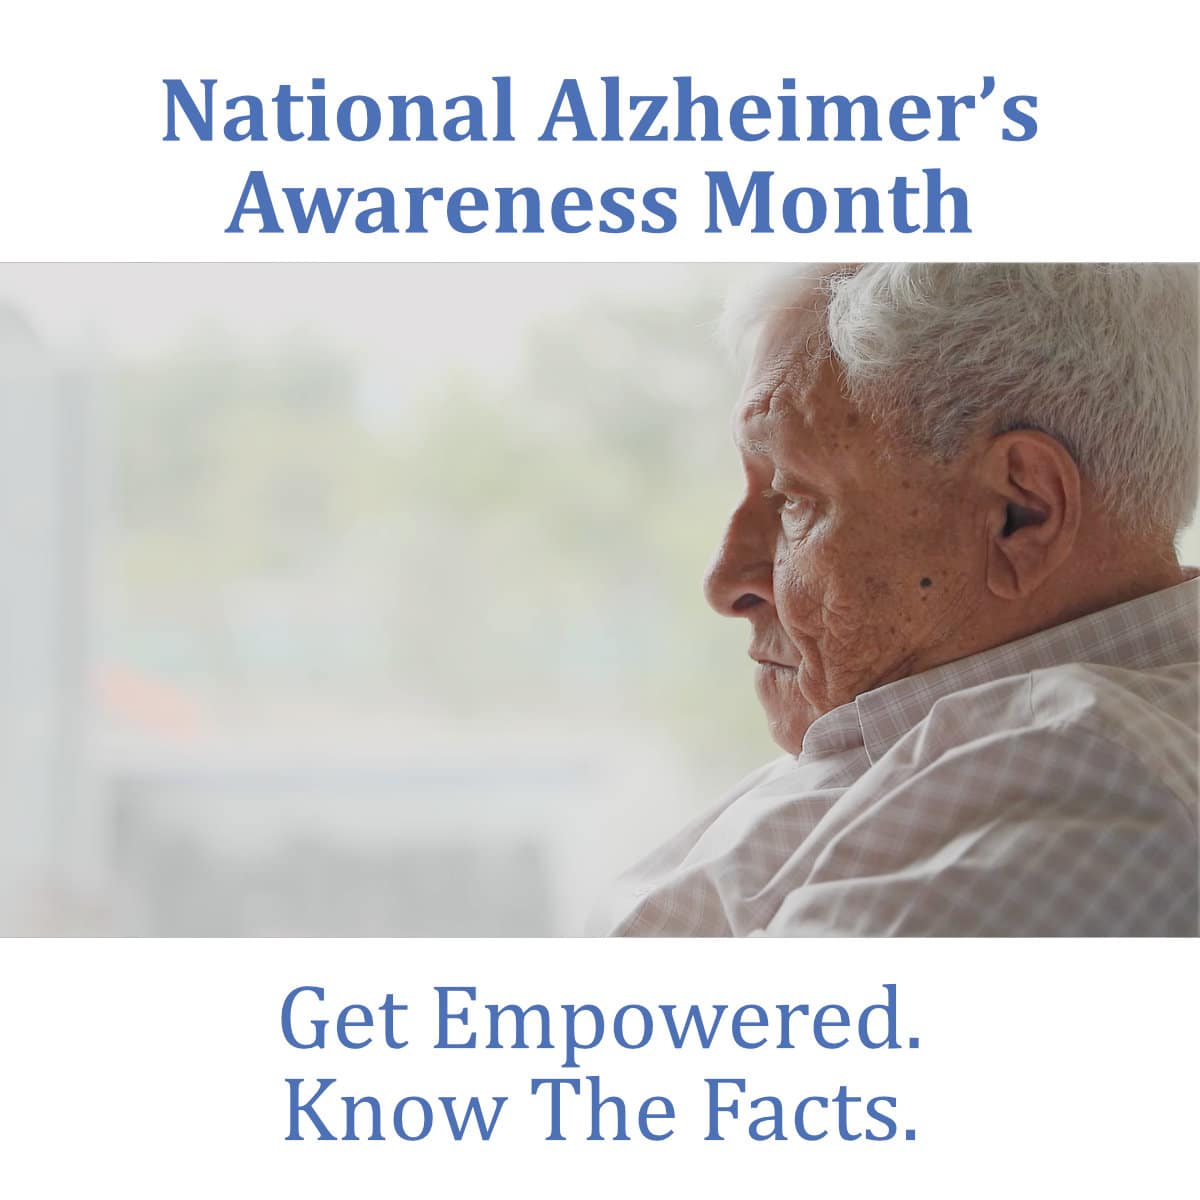 National Alzheimer’s Awareness Month: Know The Facts